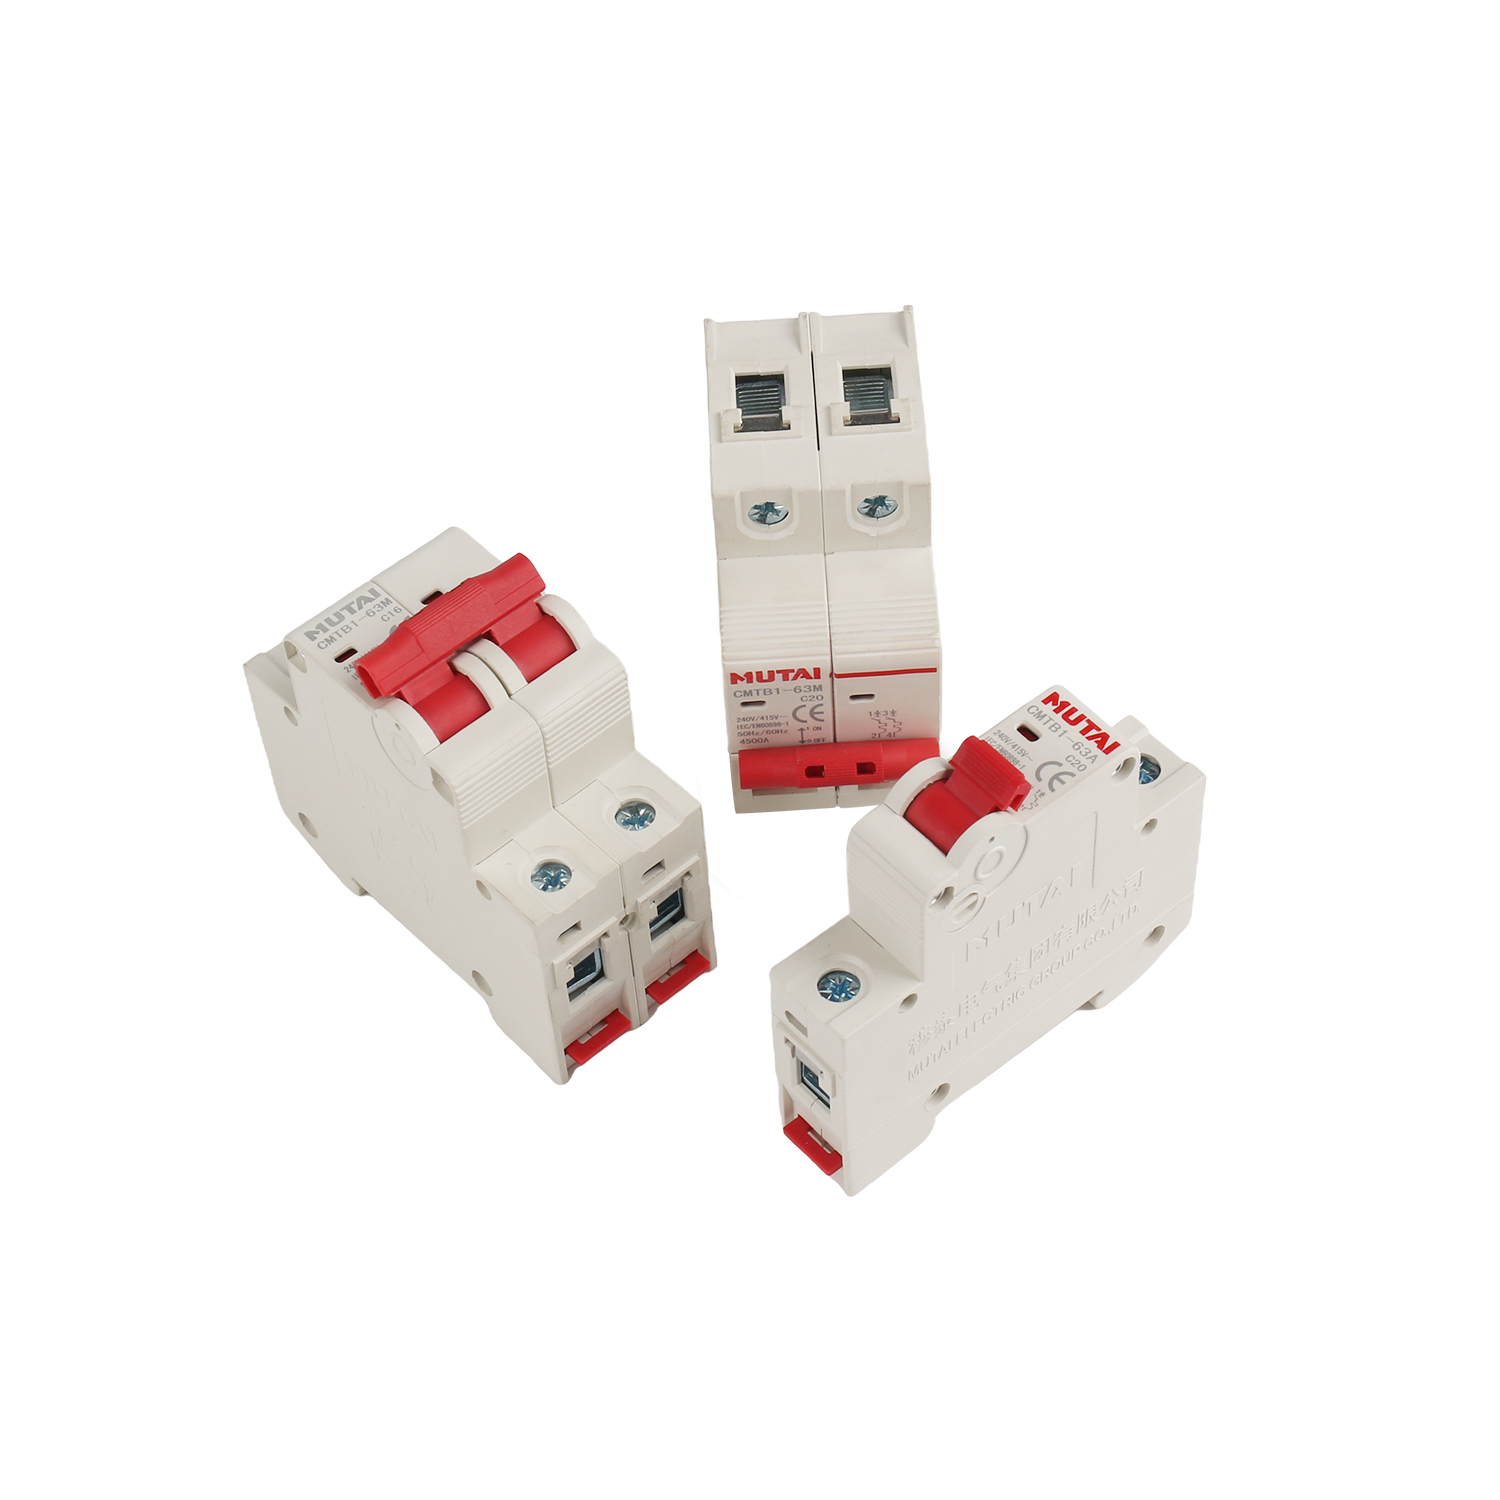 Selection of A, B, C and D types of miniature circuit breakers